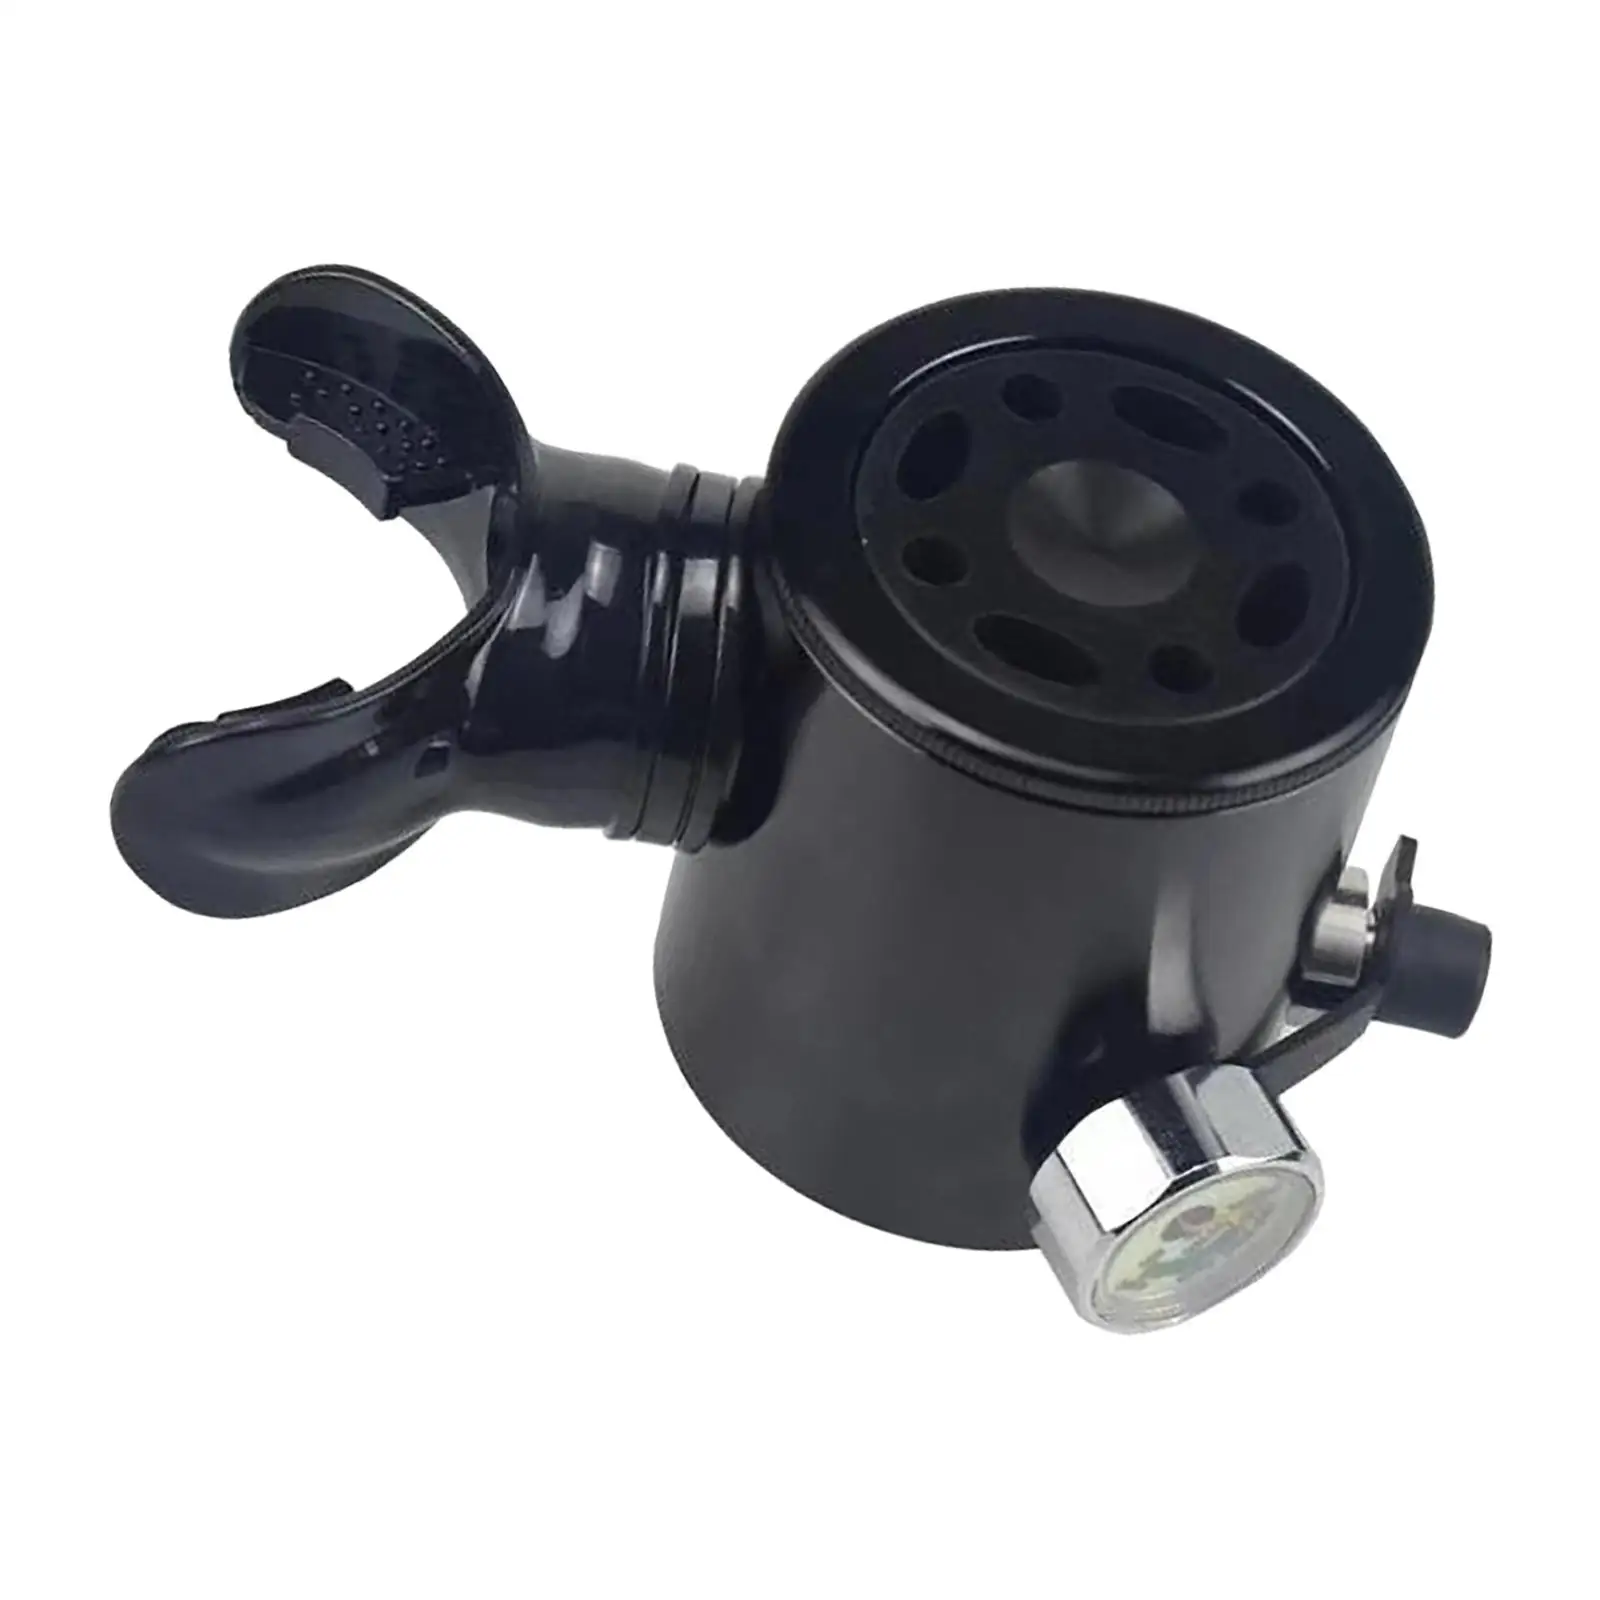 Scuba Diving Tank Adapter Breathing Refill Adaptor Head Mouth for Trip  Traveling